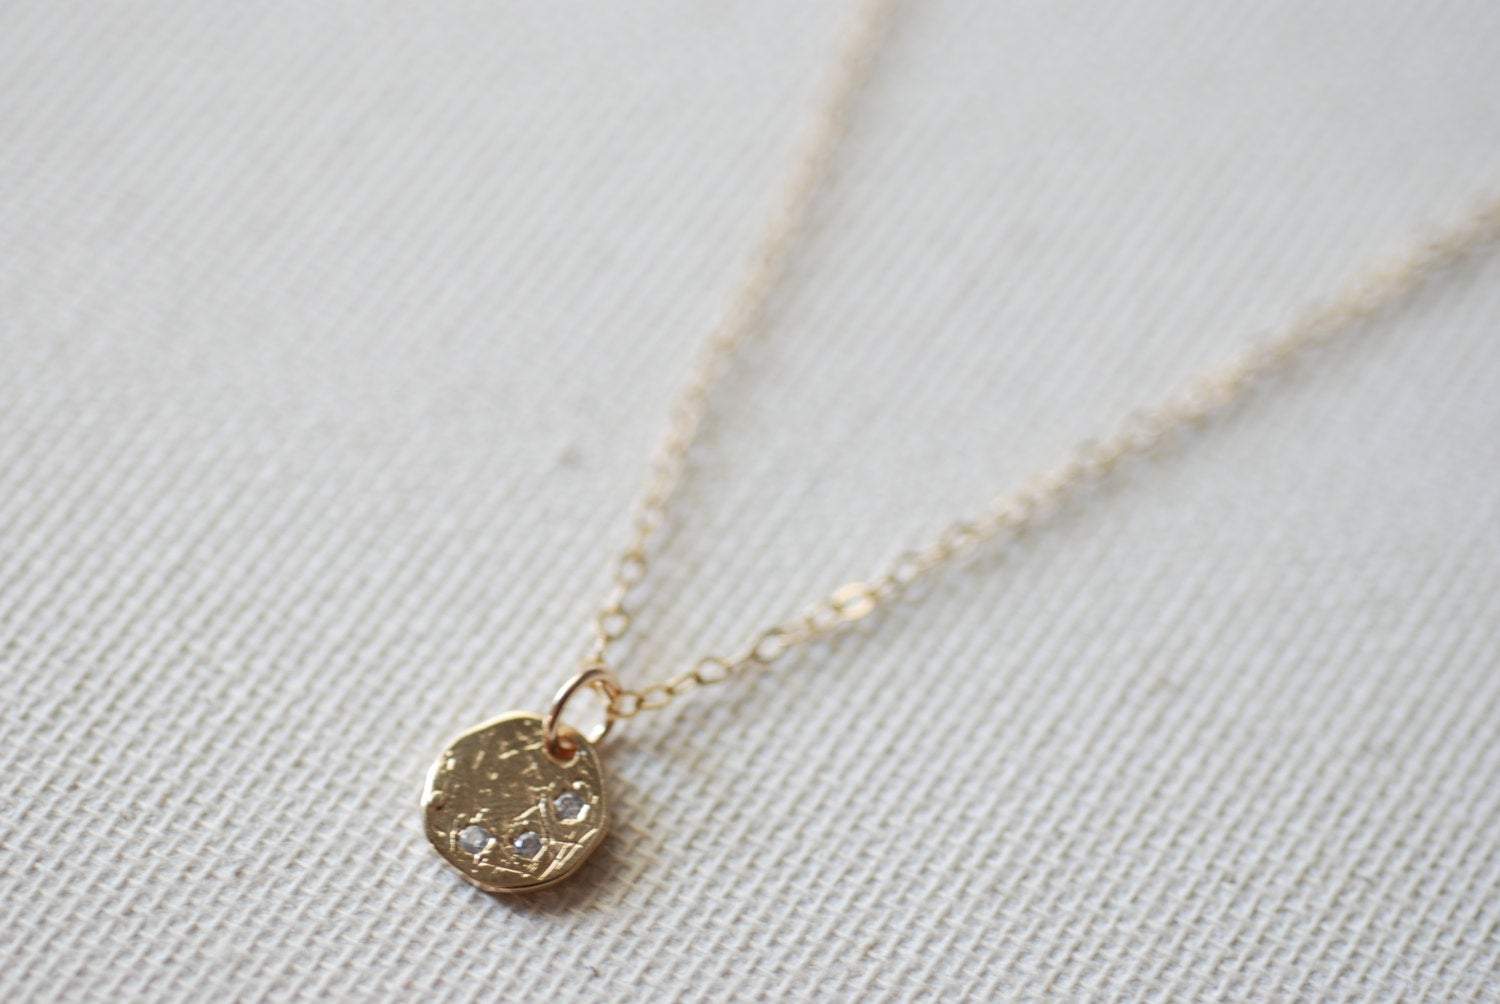 Gold Circle Necklace with Crystals, Make a wish necklace, Crystal Disc Necklace, Simple Dainty Necklace, Etched Disc Necklace - HarperCrown